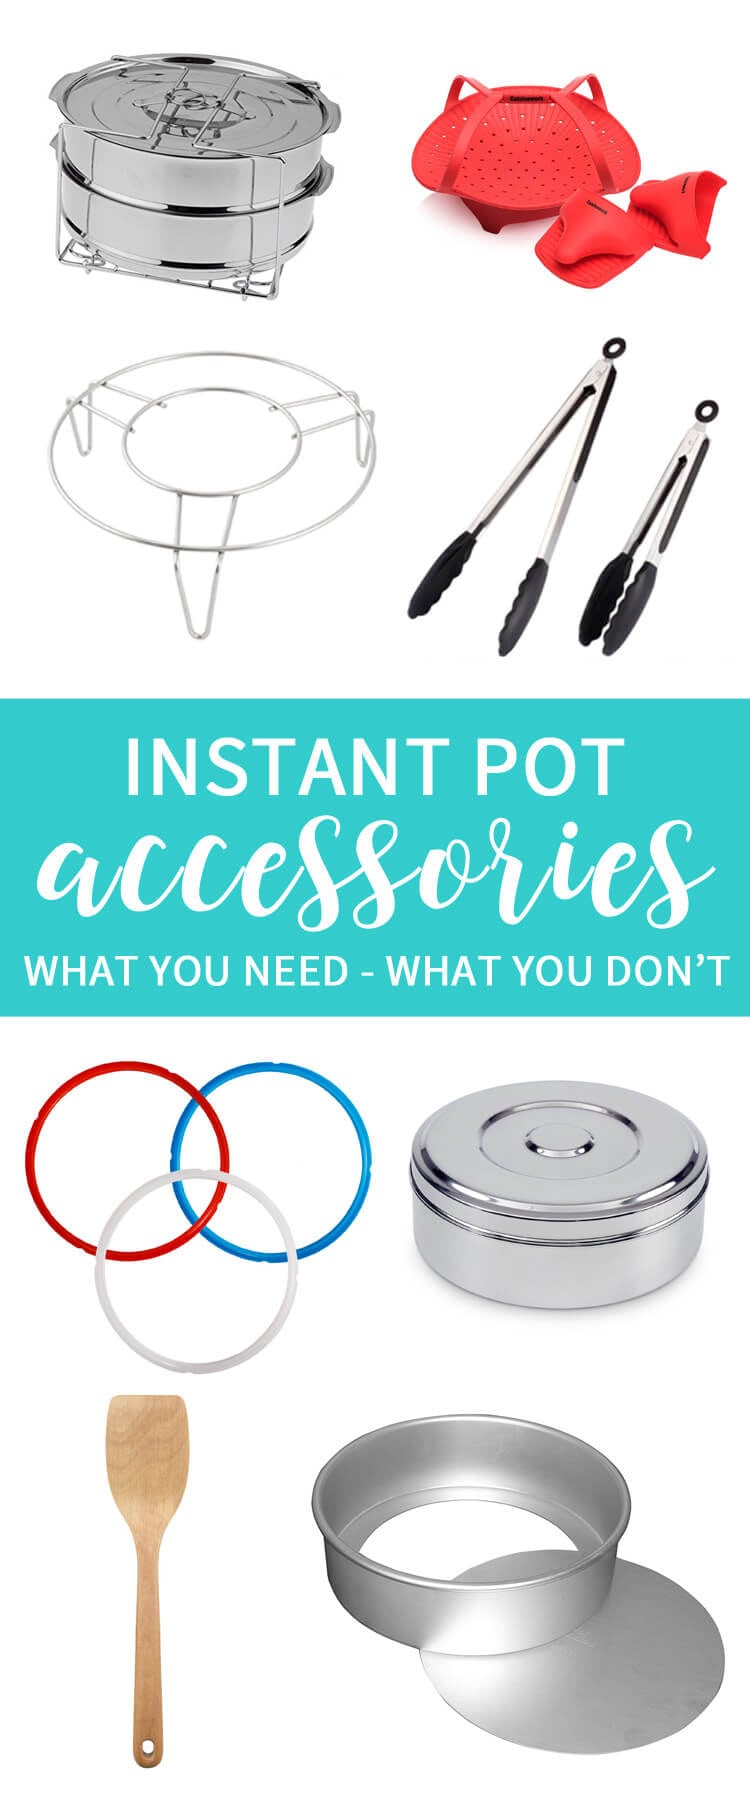 Instant Pot Accessories - What you need and what you don't.